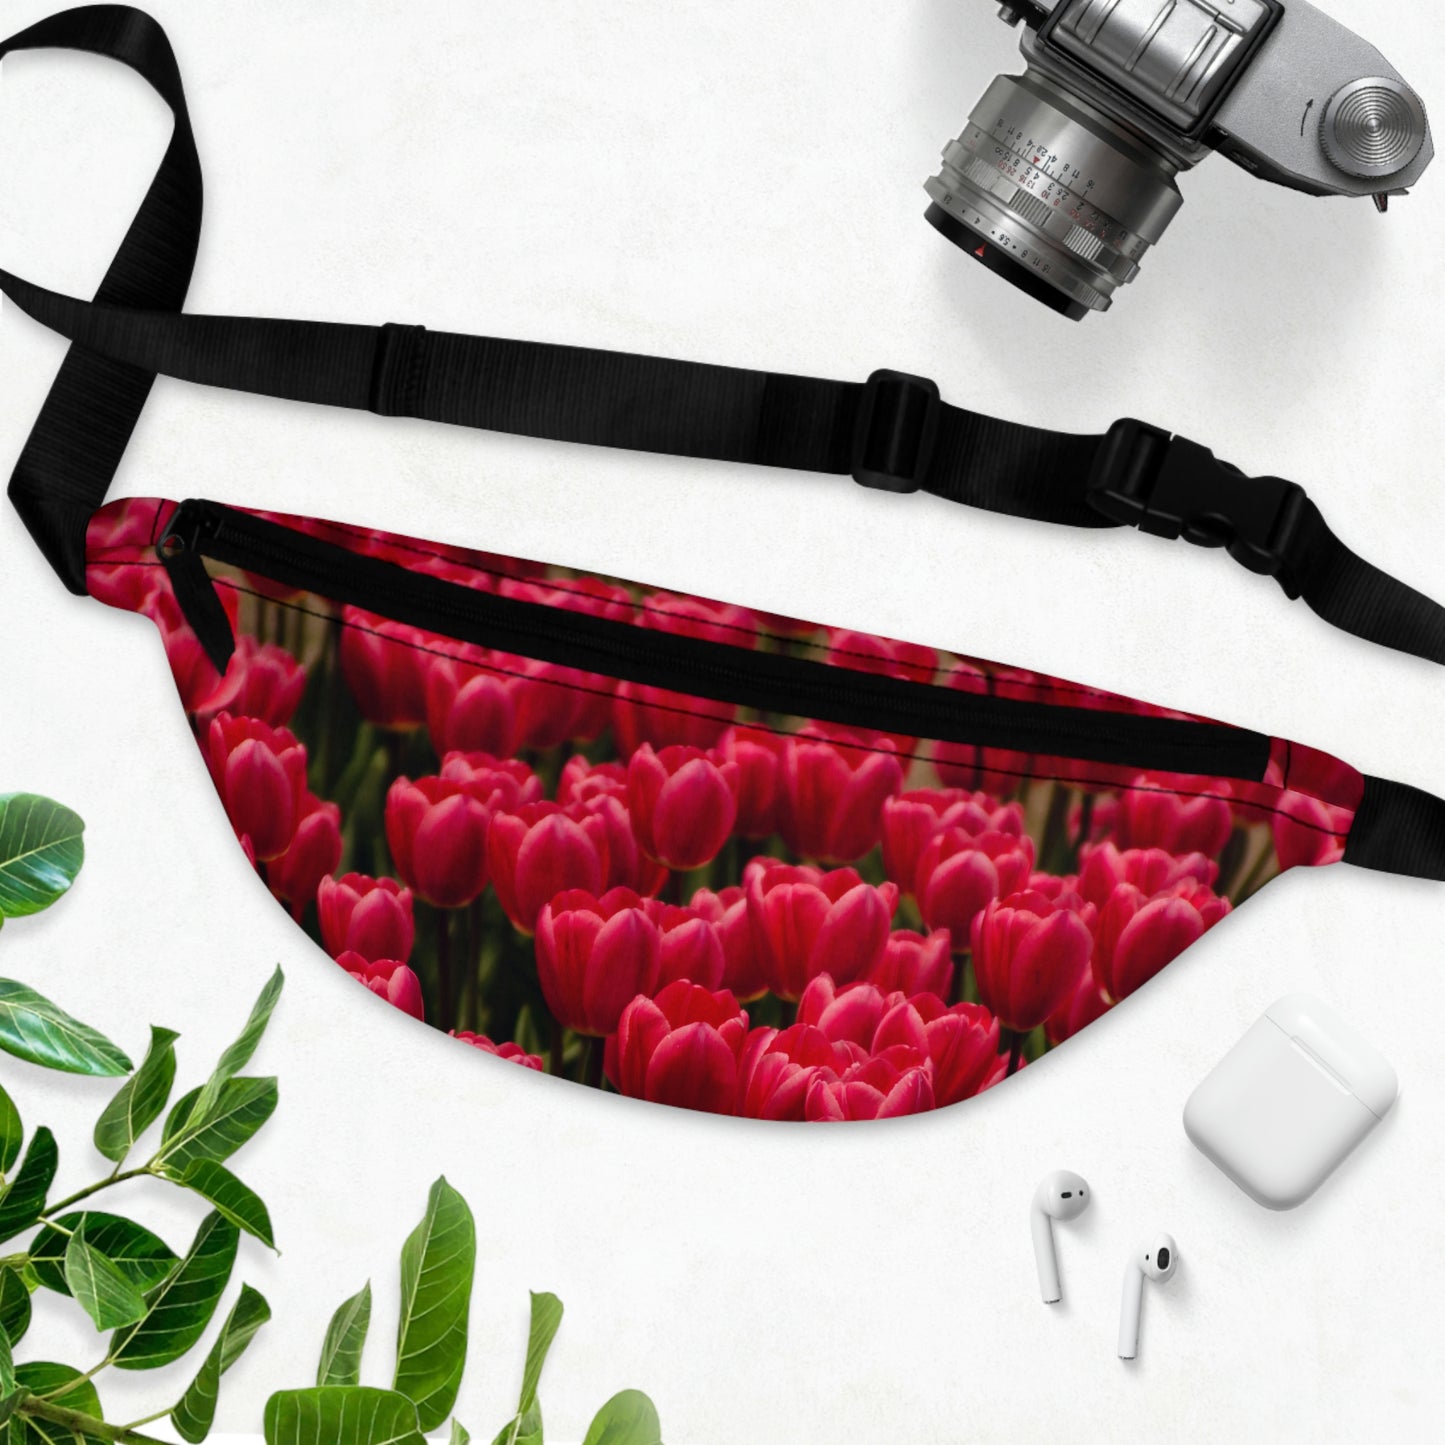 Flowers 14 Fanny Pack